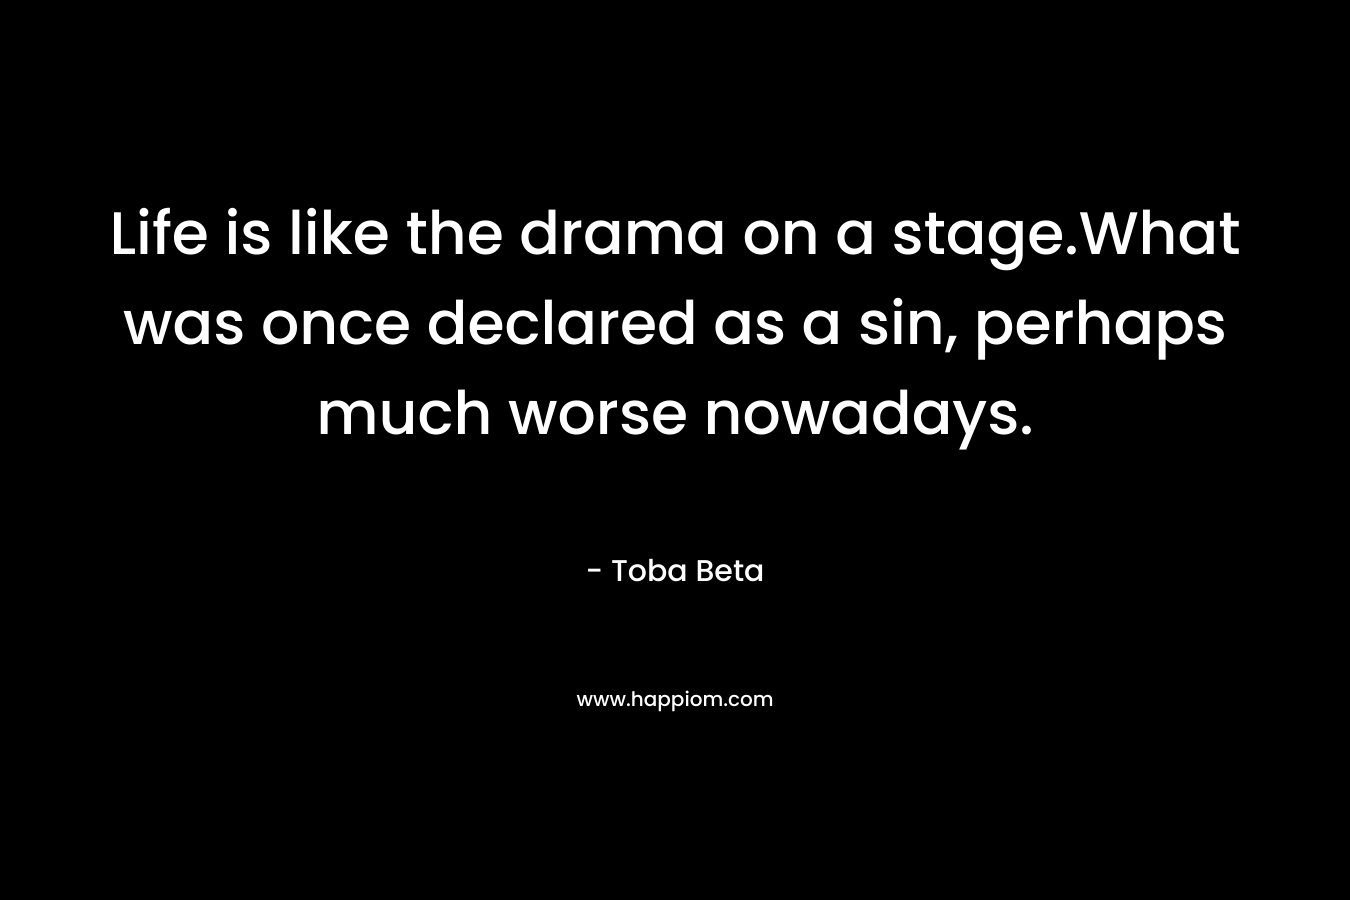 Life is like the drama on a stage.What was once declared as a sin, perhaps much worse nowadays. – Toba Beta